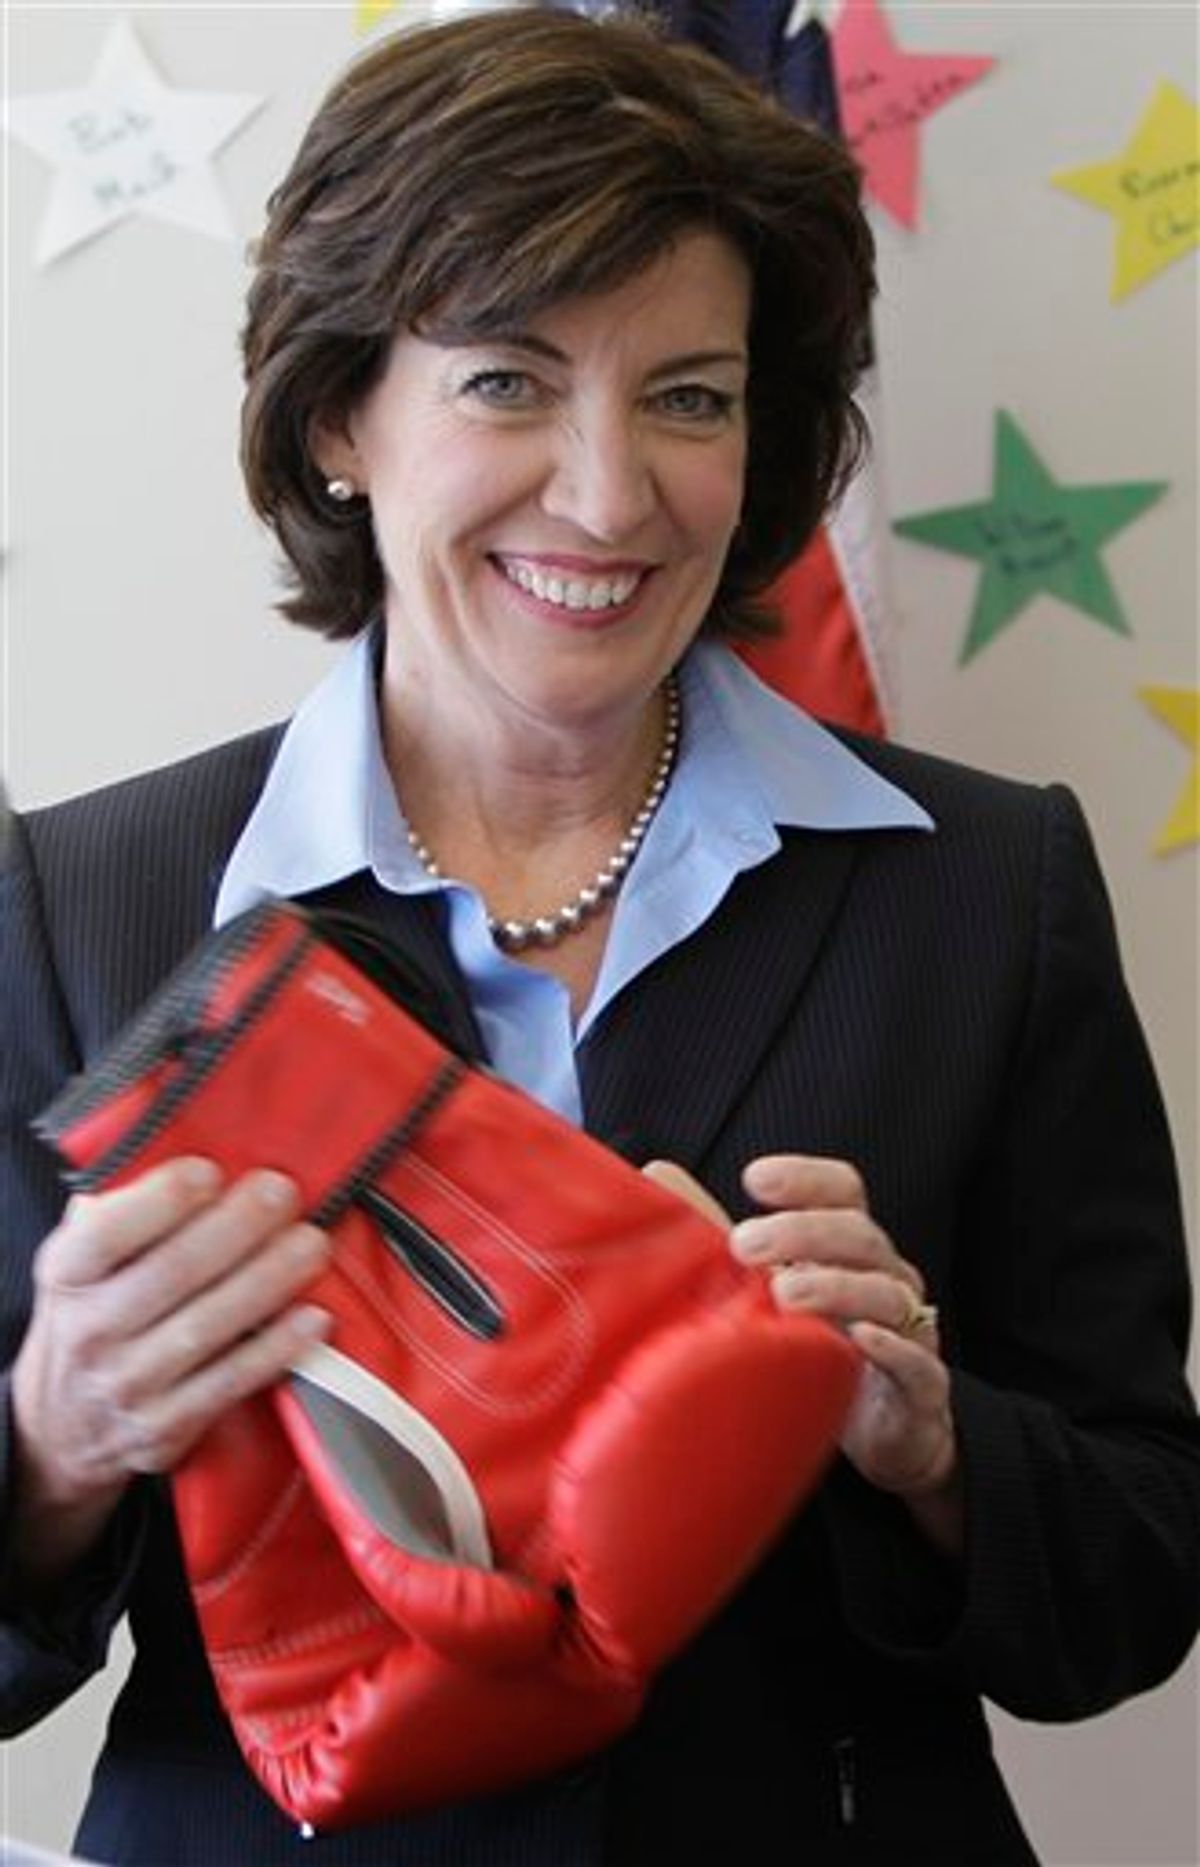 Democratic candidate for the 26th District Congressional seat, Kathy Hochul speaks while holding a pair of boxing gloves during a news conference in Clarence, N.Y., Monday, May 9, 2011. (AP Photo/David Duprey) (AP)